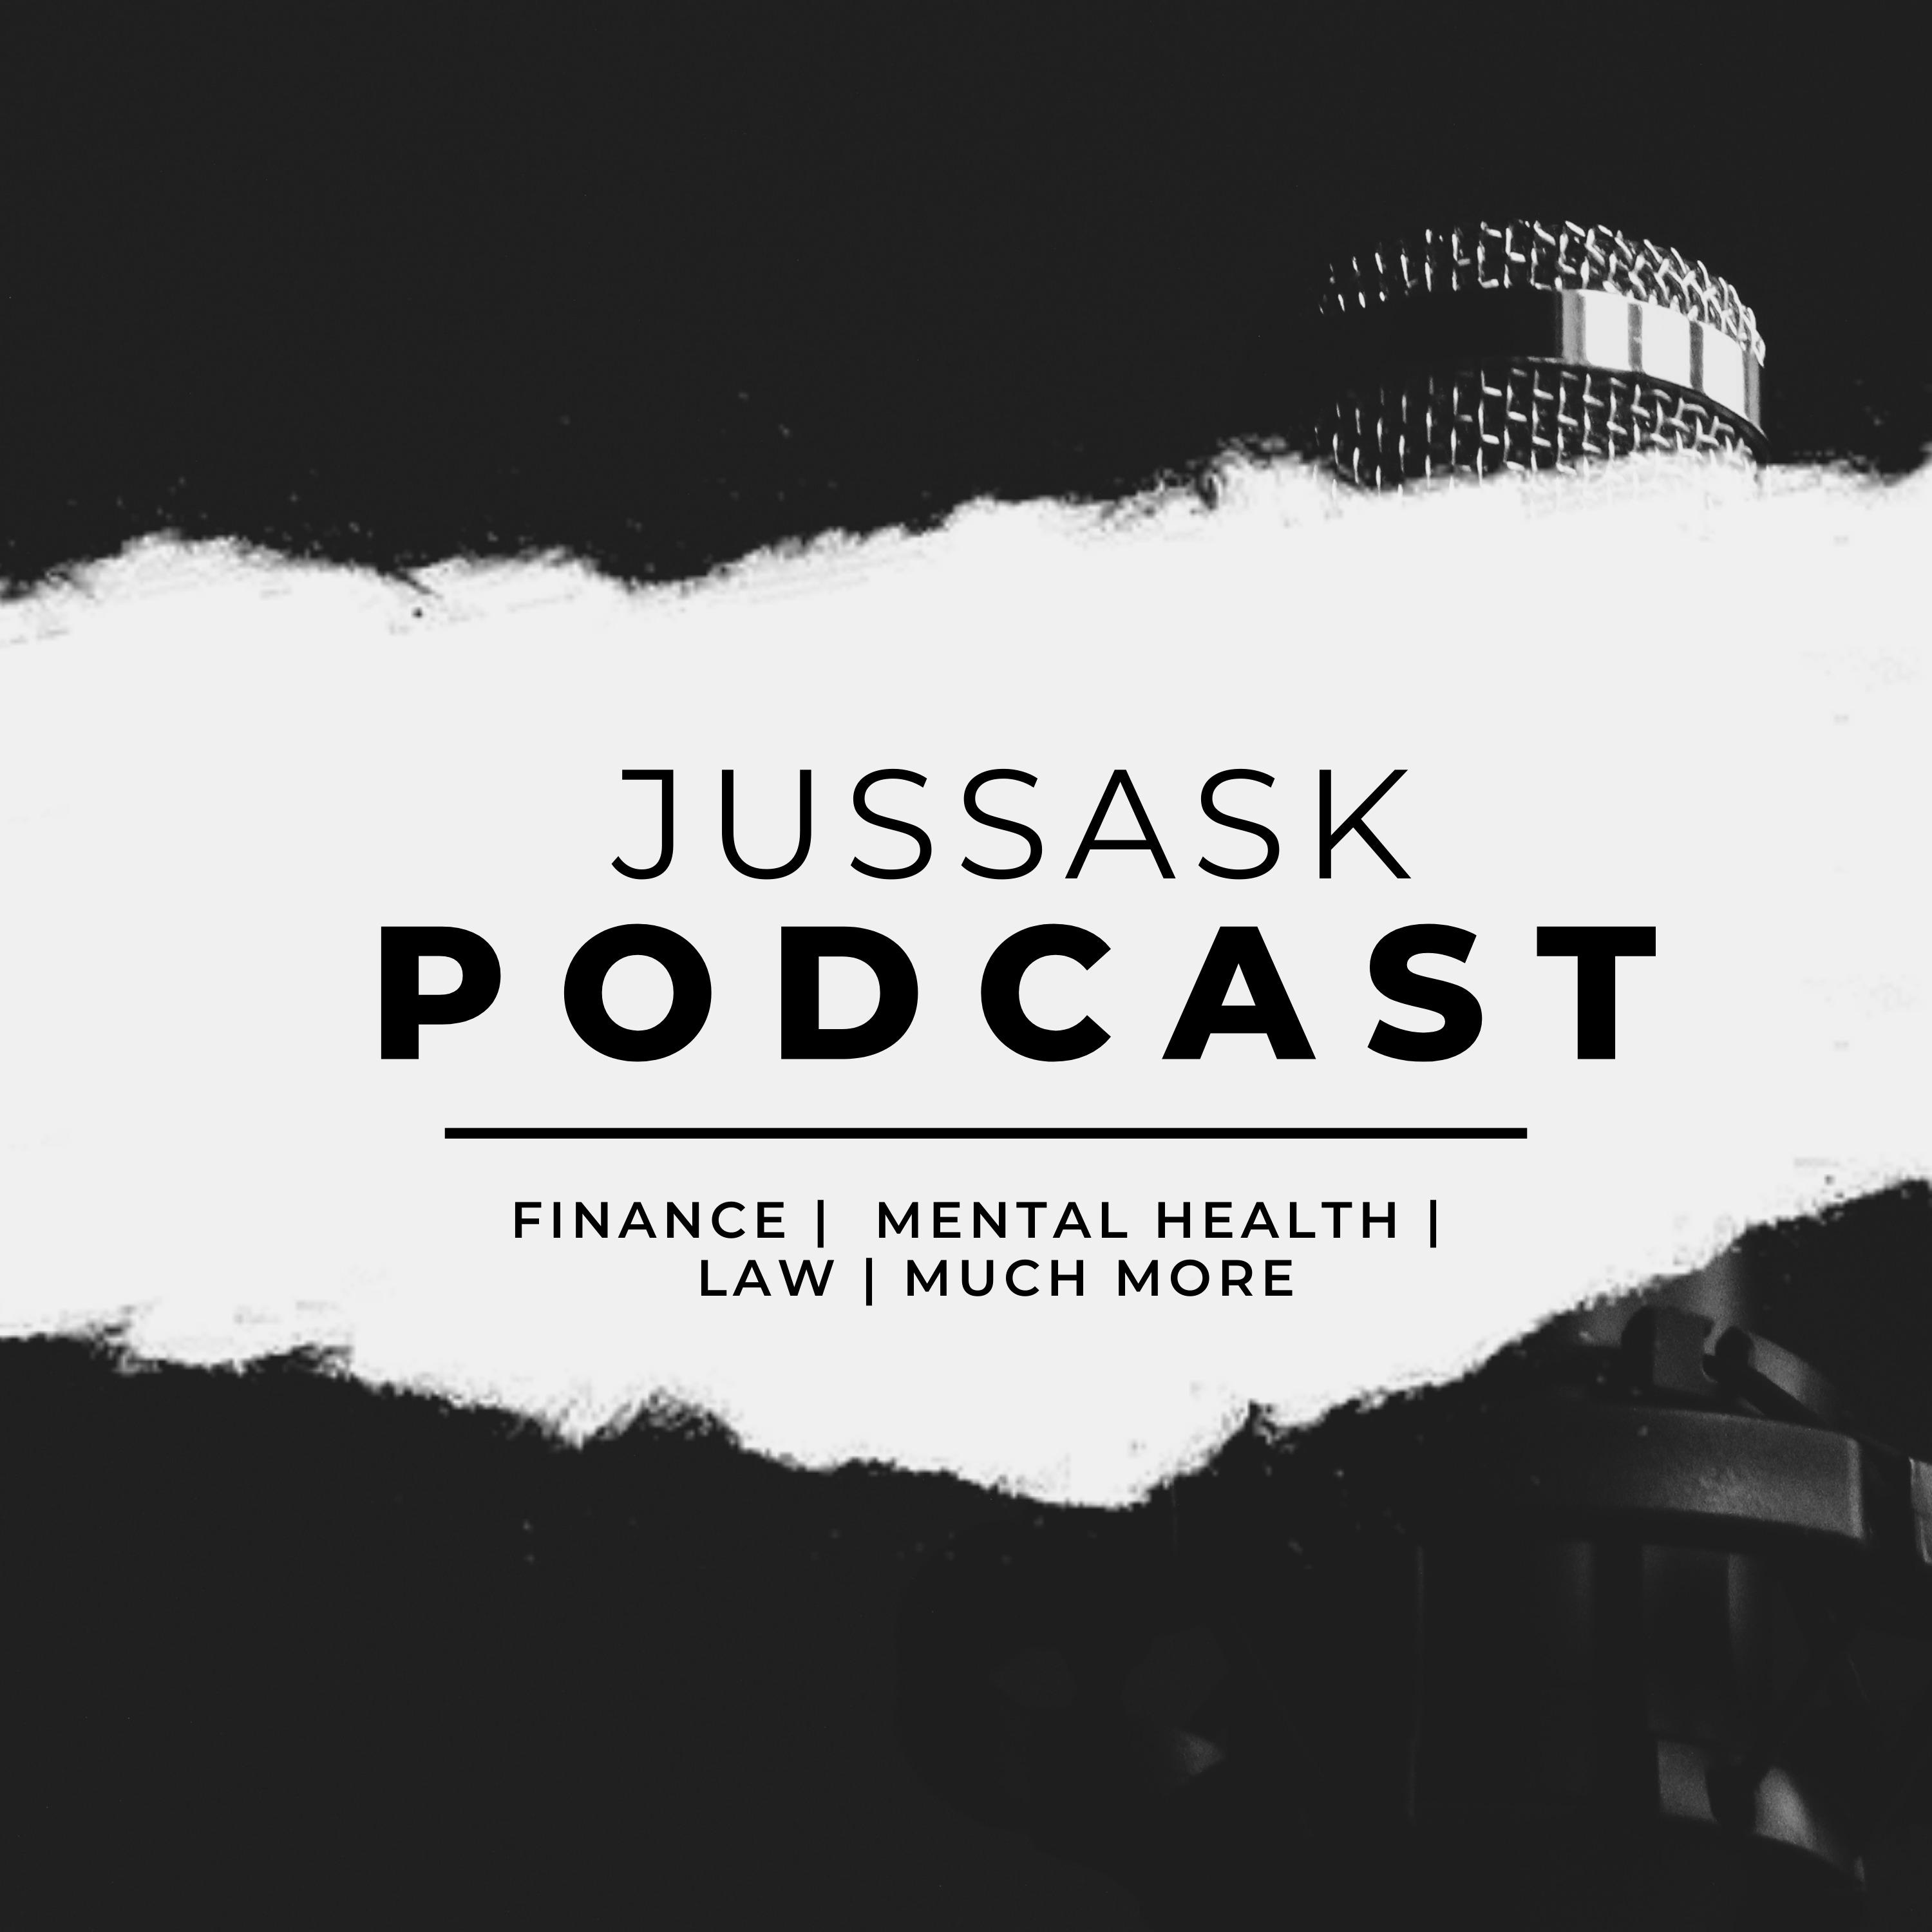 JUSSASK PODCAST